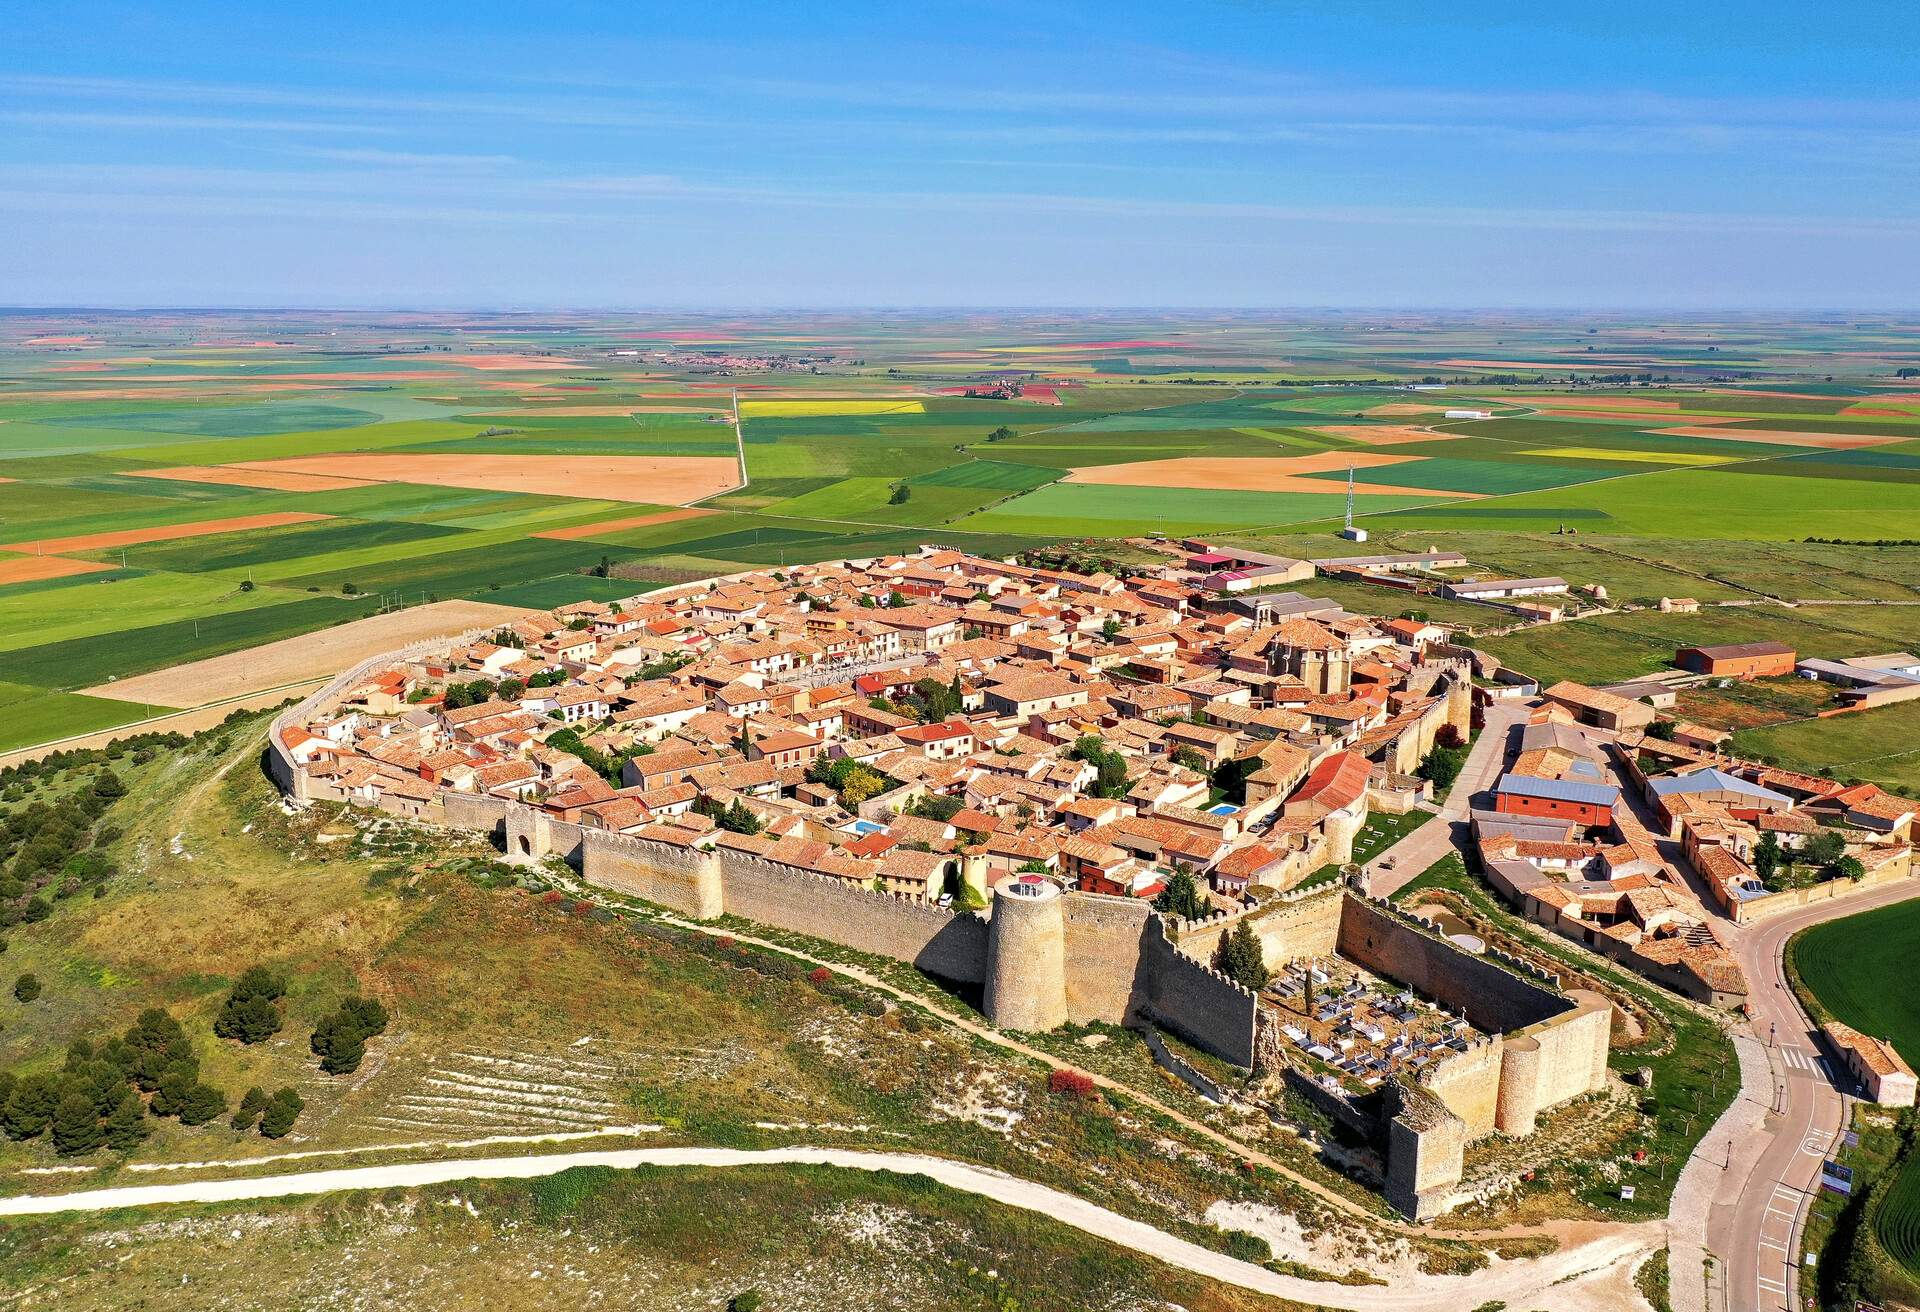 Panoramic aerial view of the walled town of Urueña, Valladolid